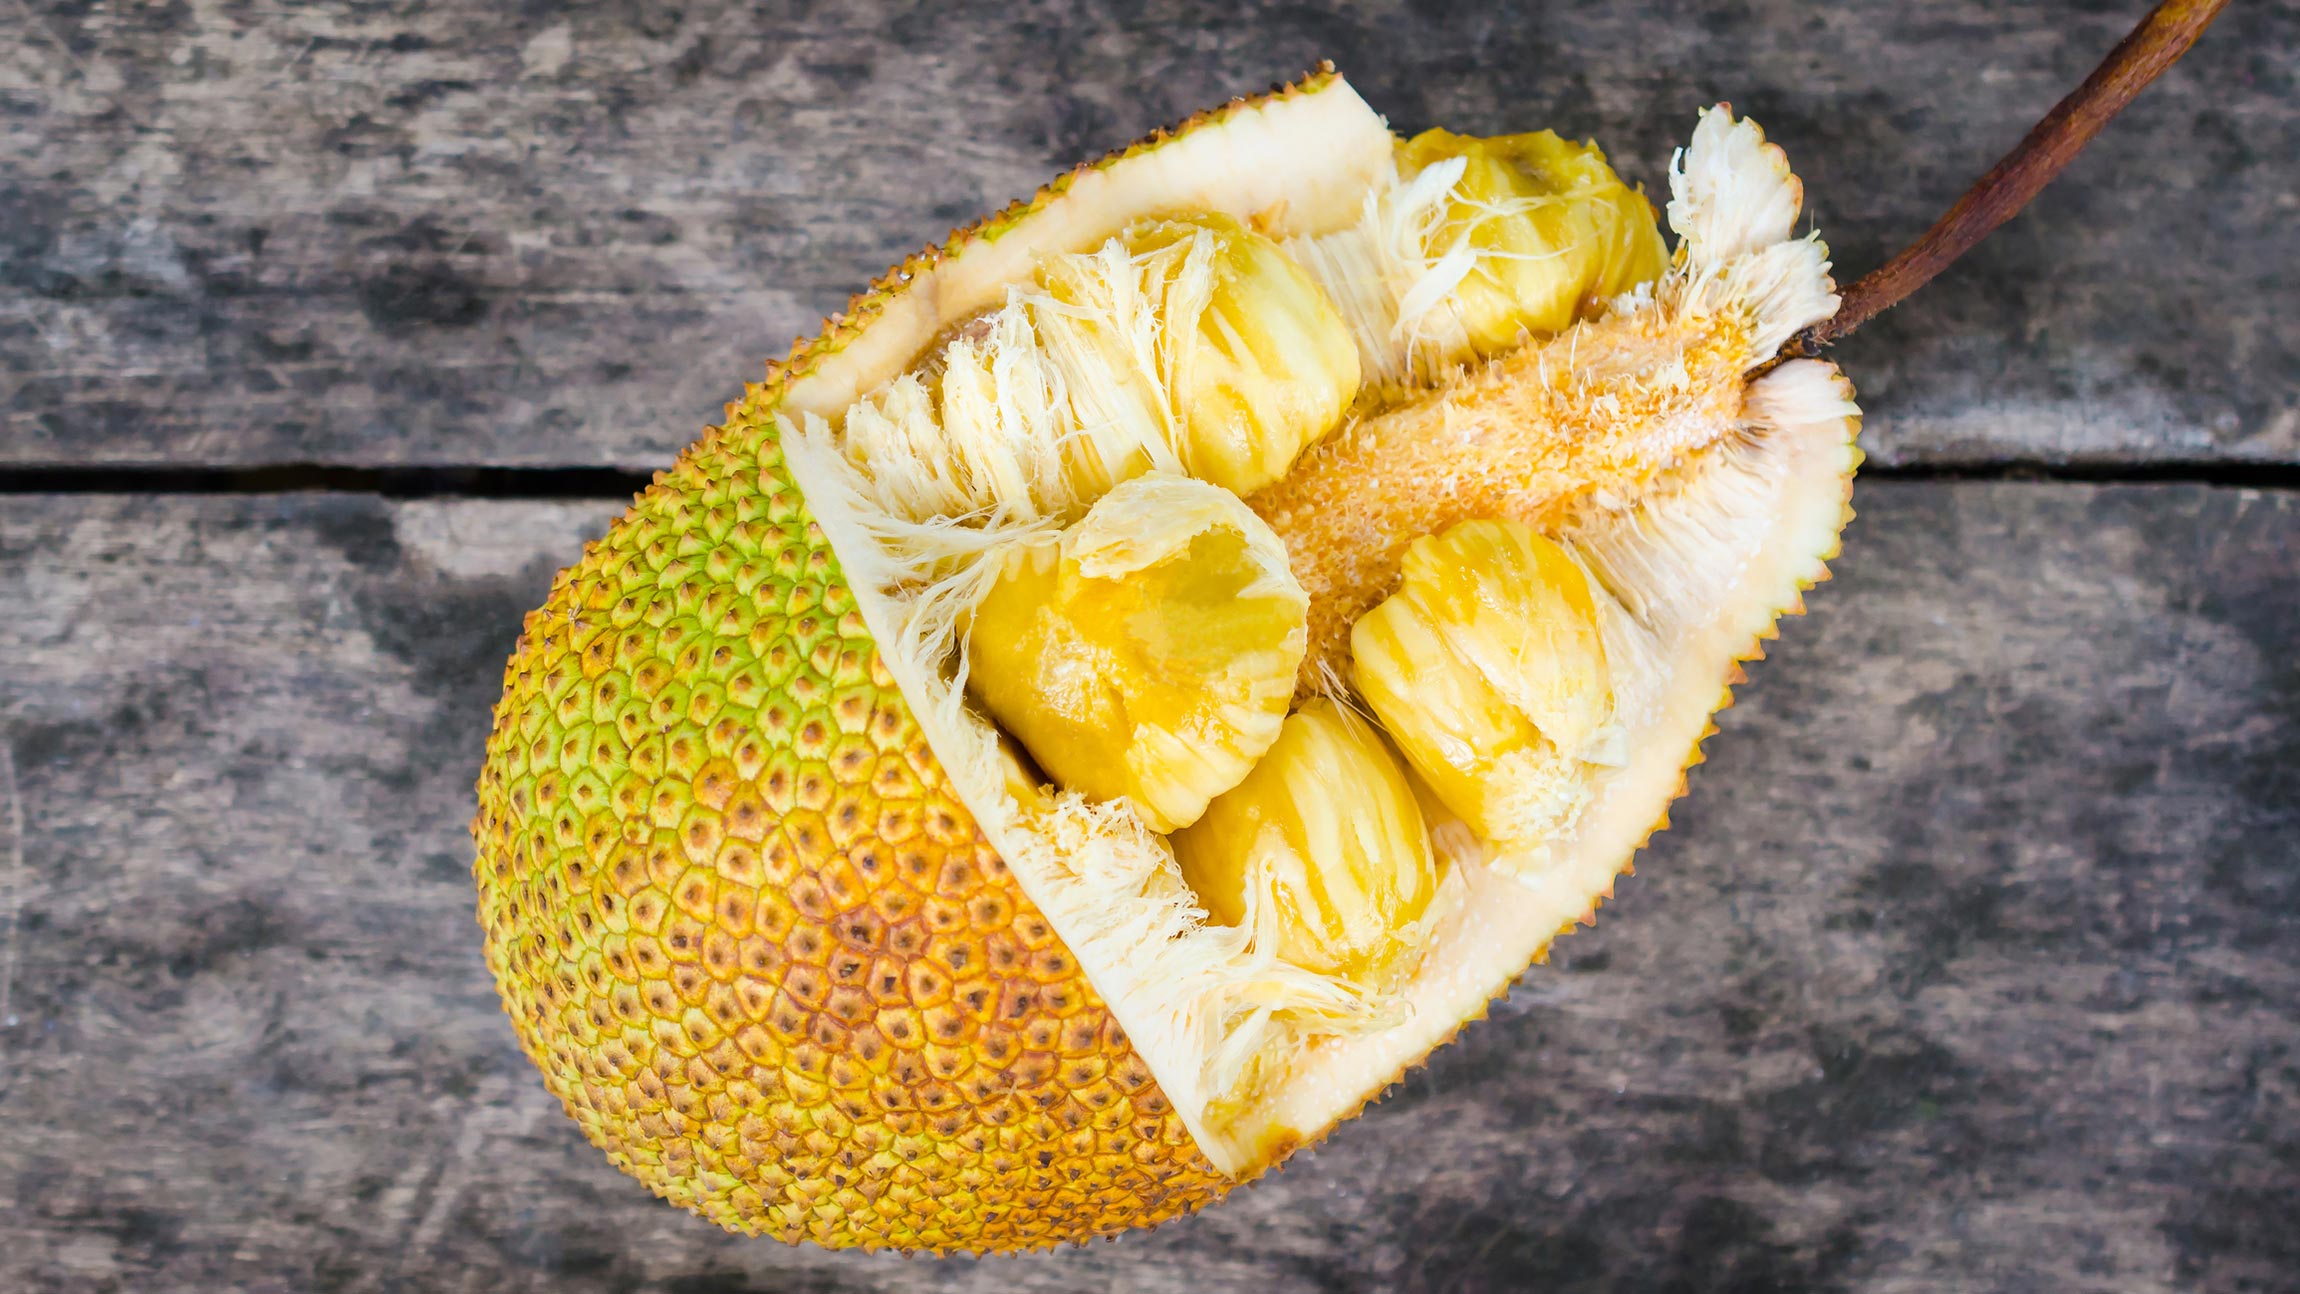 What is jackfruit? This is an image of what a jackfruit looks like on the inside.